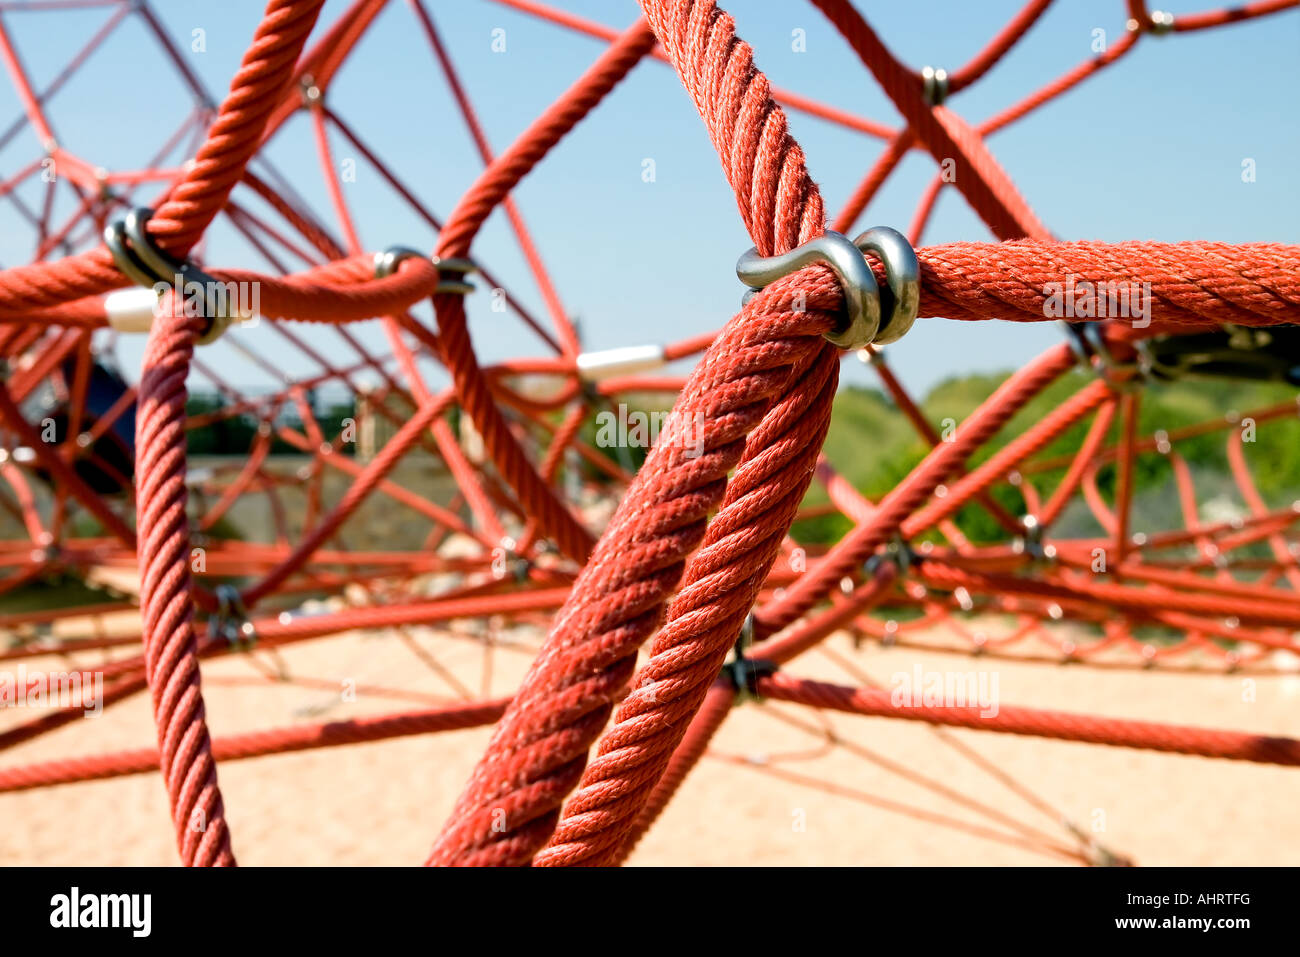 The red rope of climbing equipment in a children s playground Stock Photo